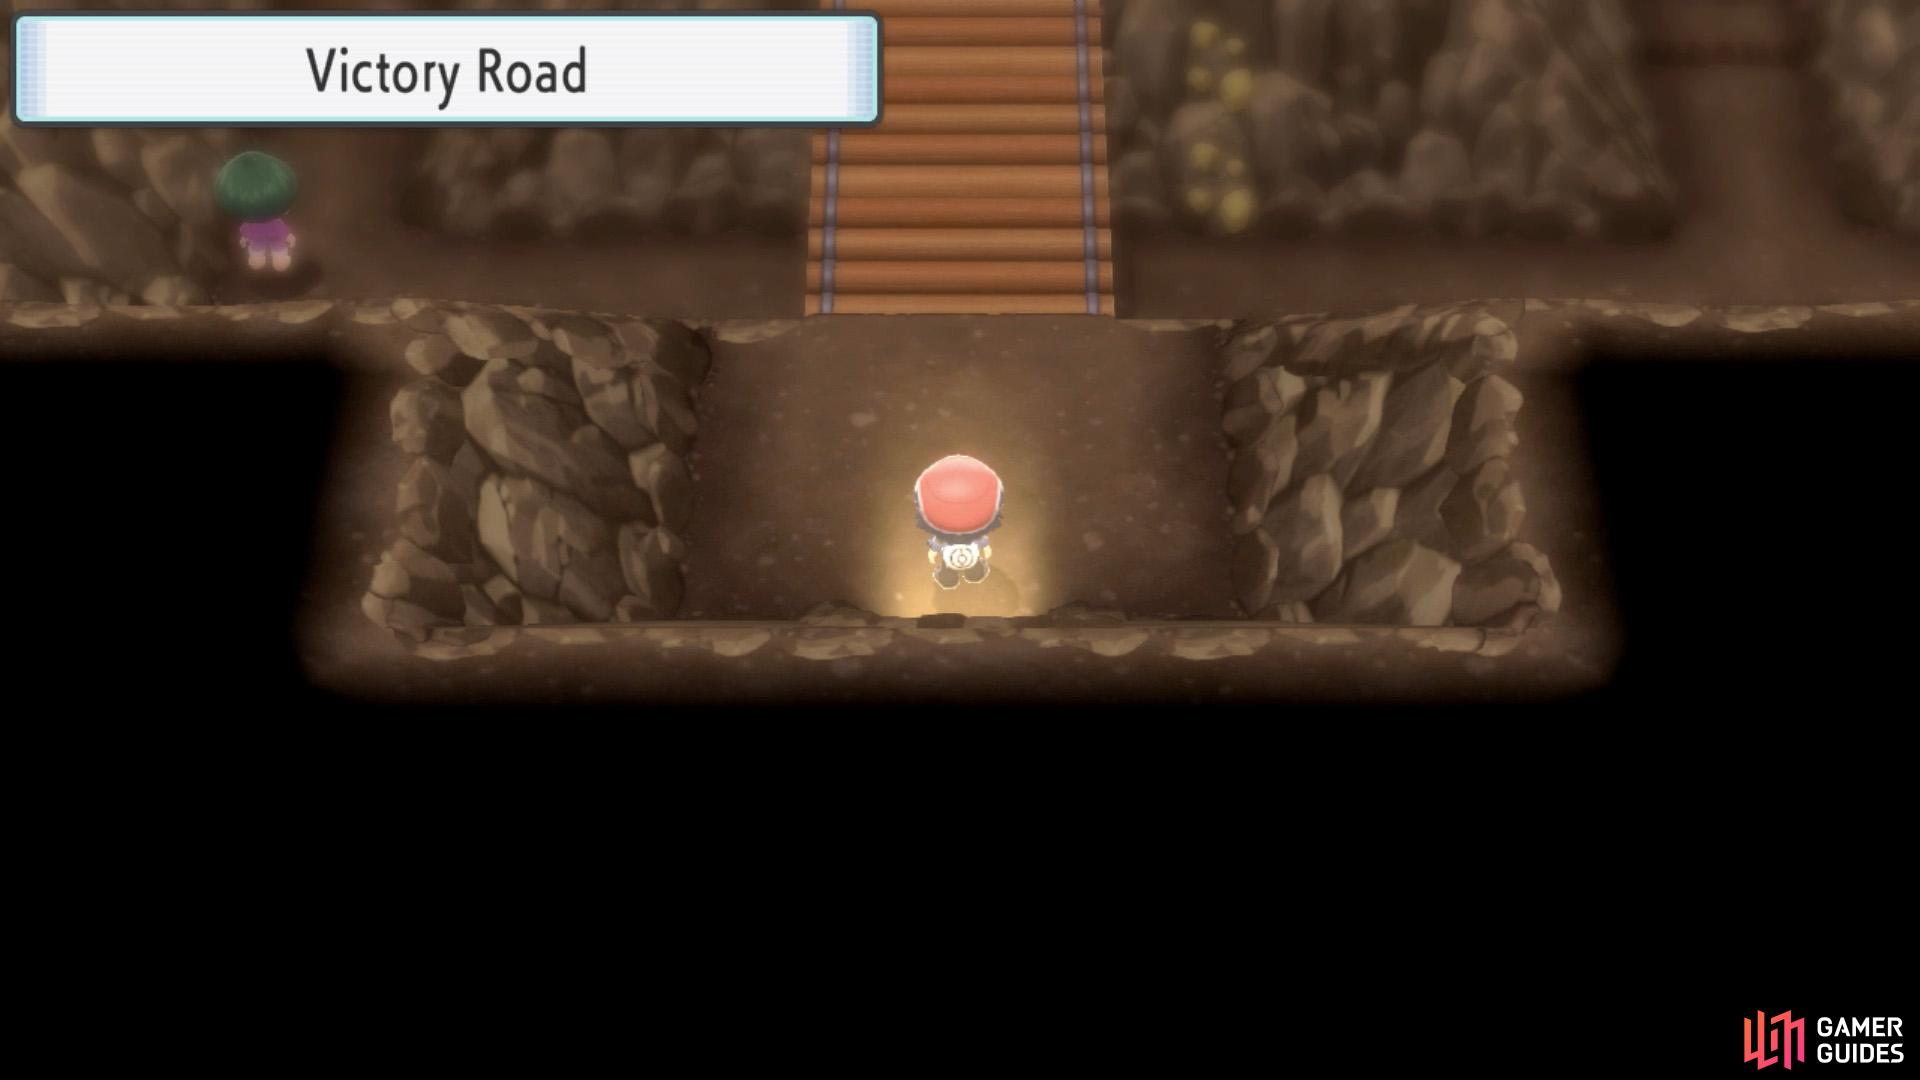 Victory Road is a maze of bridges and tunnels.